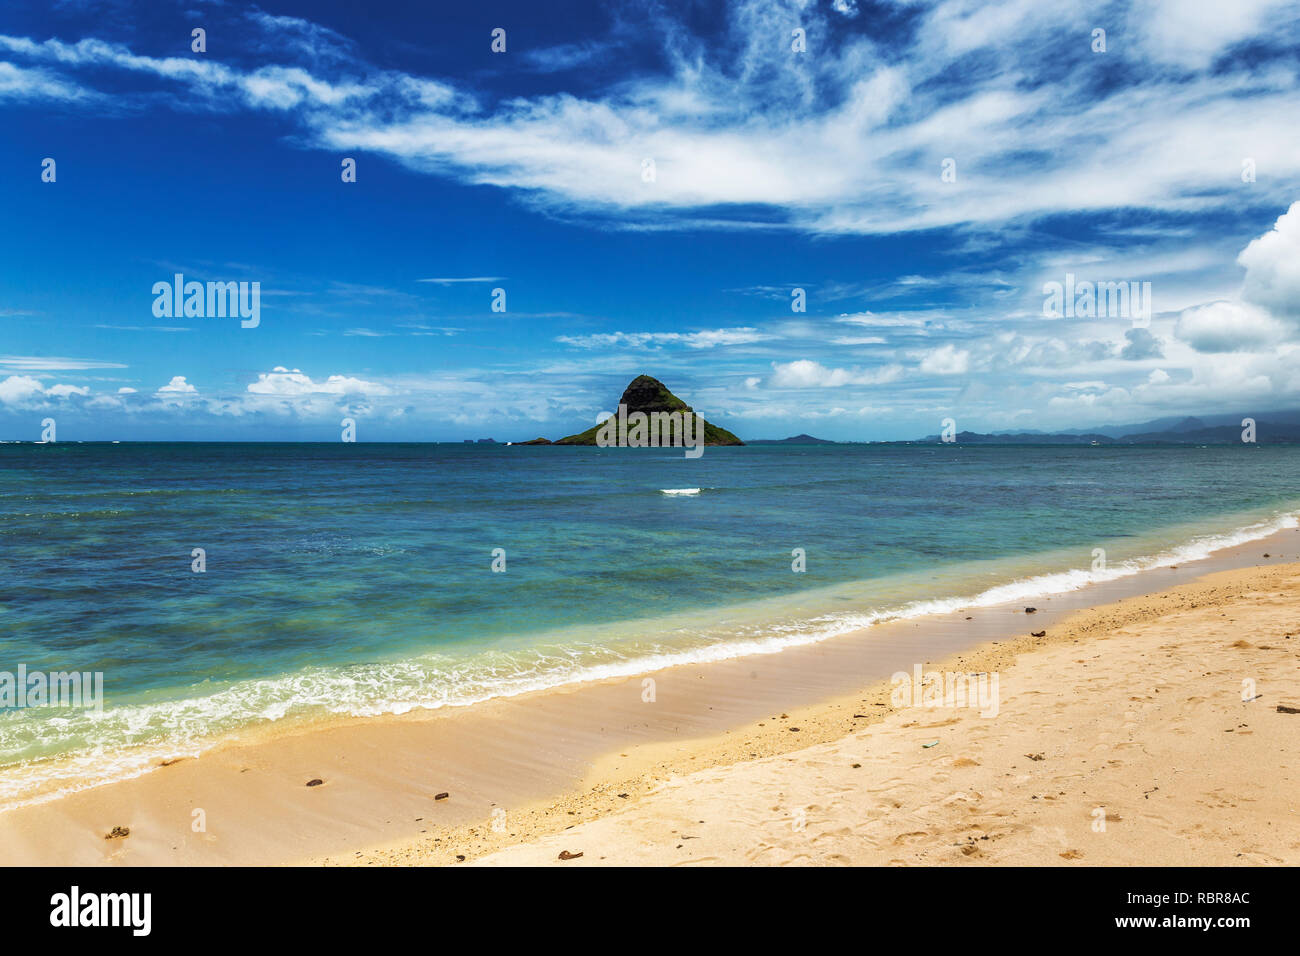 Mokoli'i Island (previously known as the outdated term 'Chinaman's Hat ...